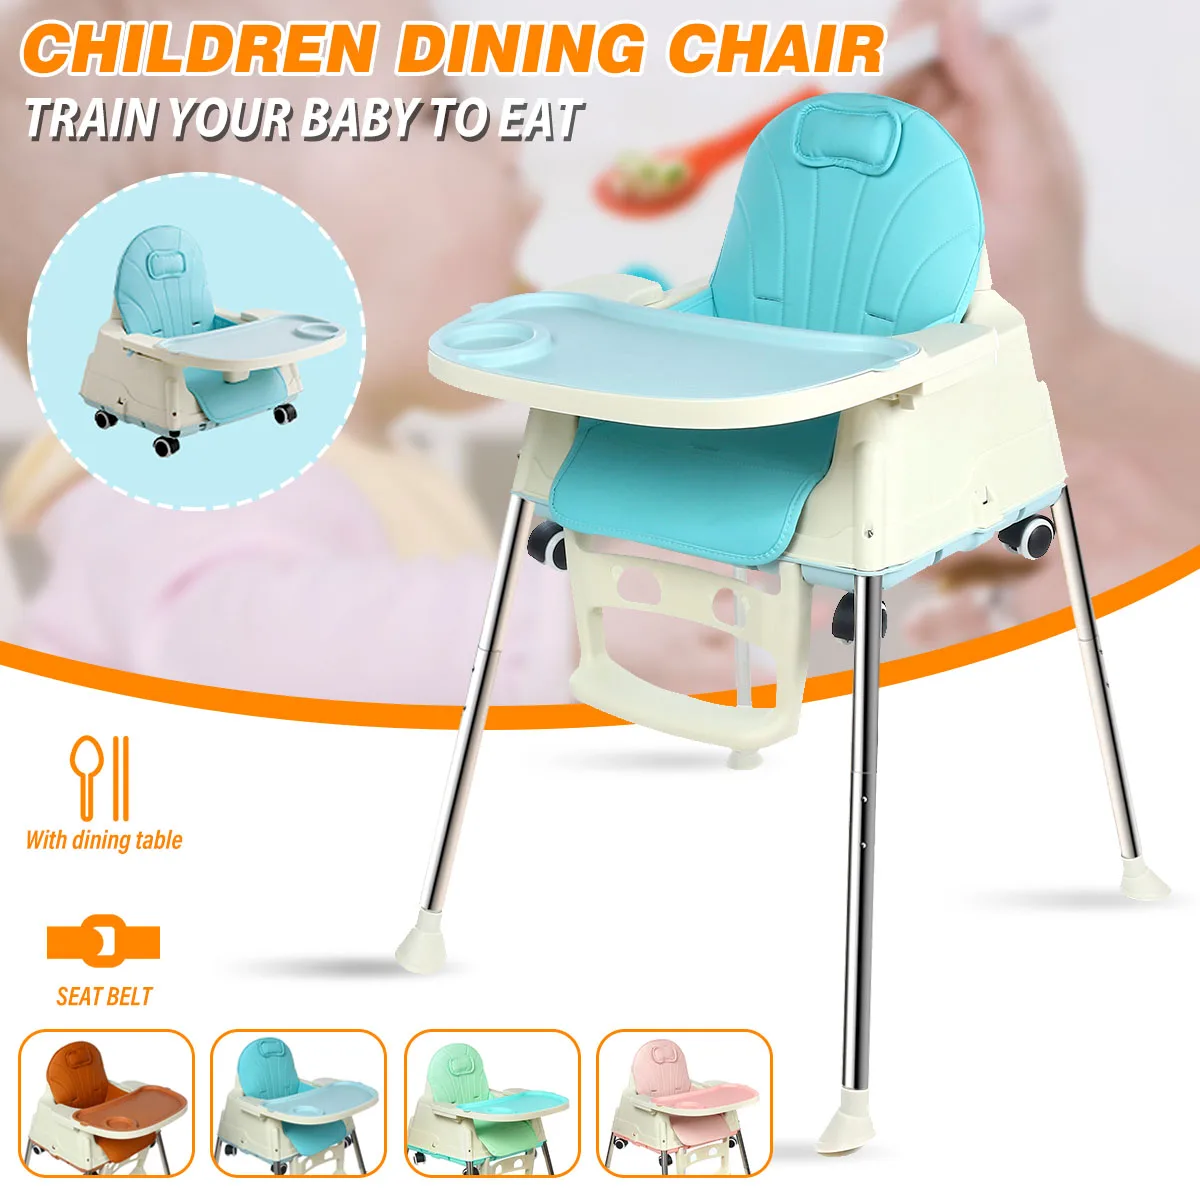 3 in 1 Baby Feeding Chair Dinner Highchair Table Kids Furniture Adjustable Height Pulley Play Chair Multifunctional EU STOCK